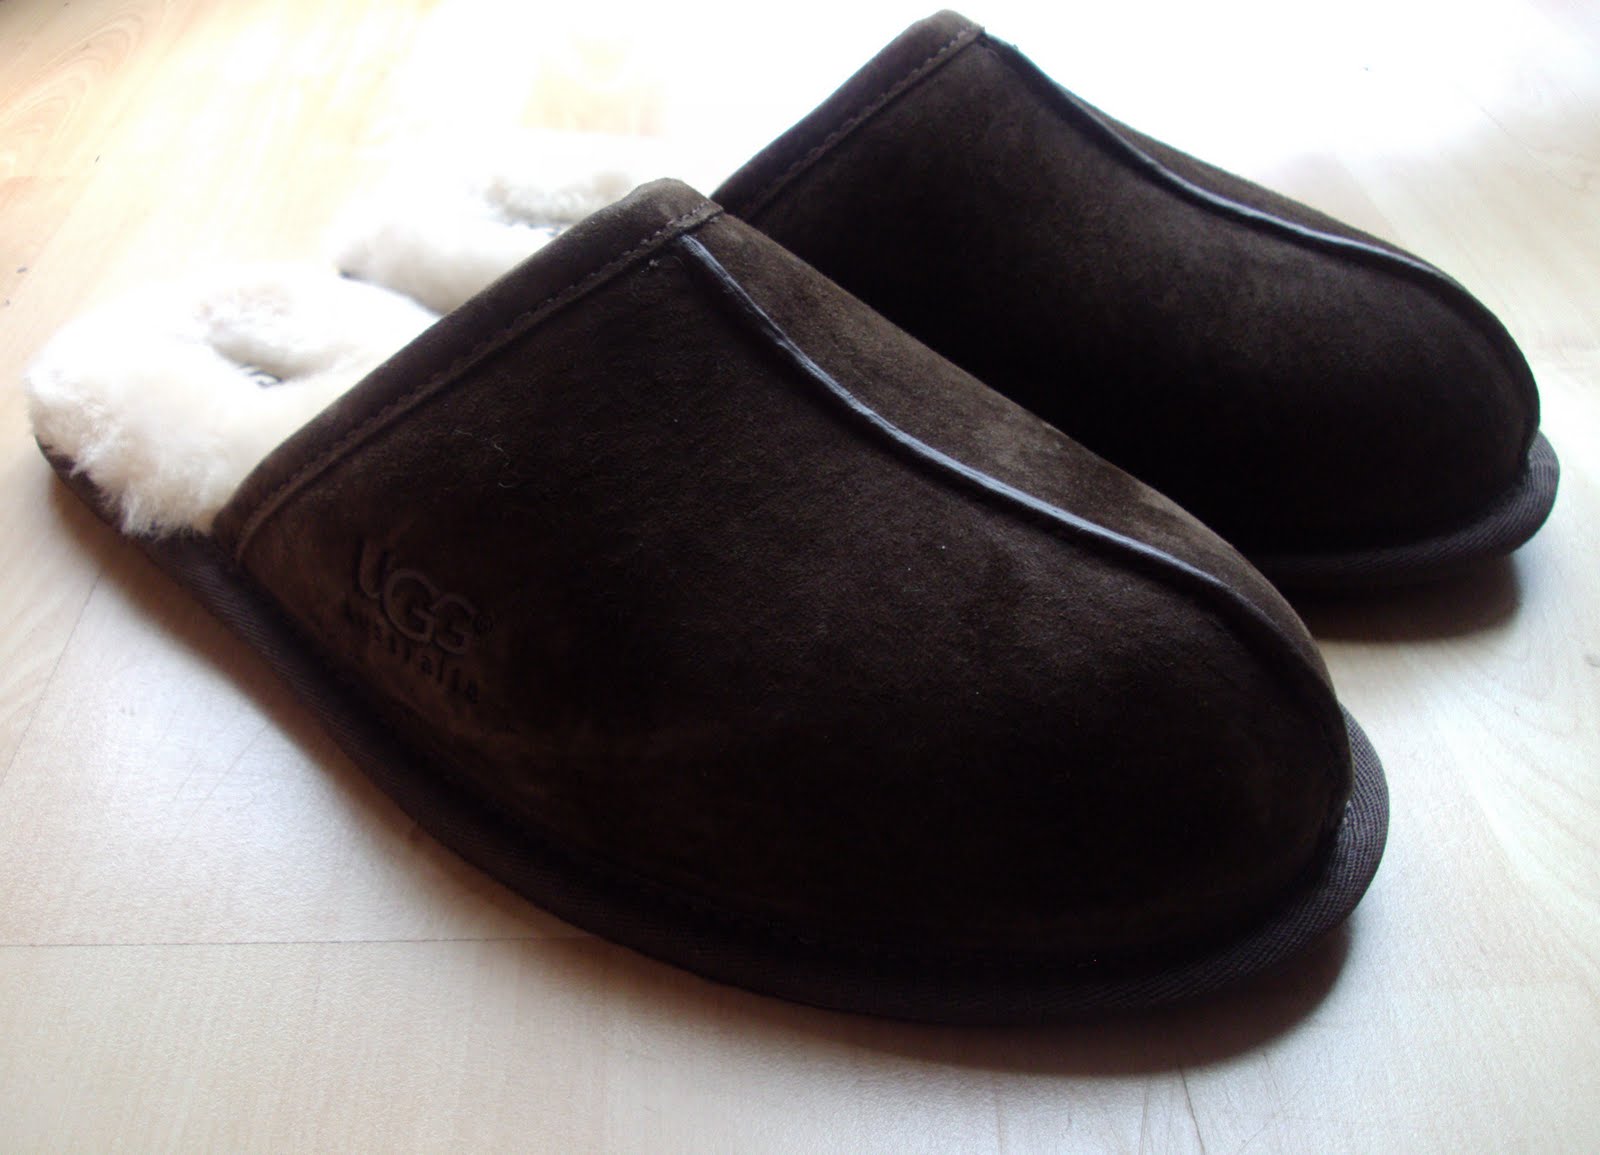 Chioma - Beauty Blogger: UGGs slippers